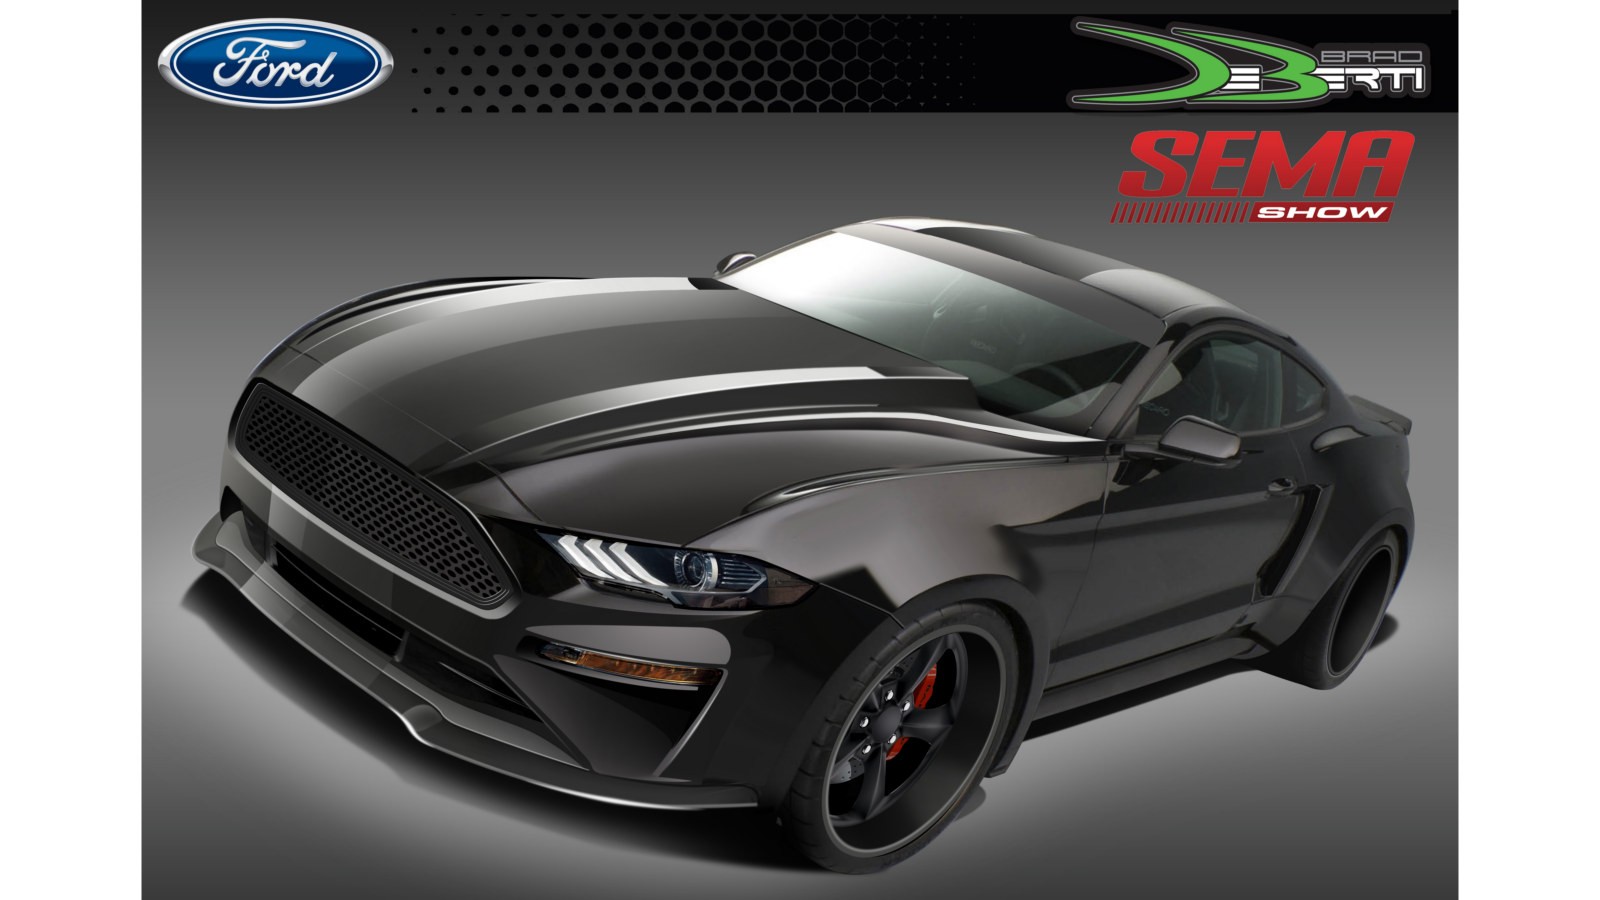 2018 Ford Mustang Fastback created by DeBerti Design